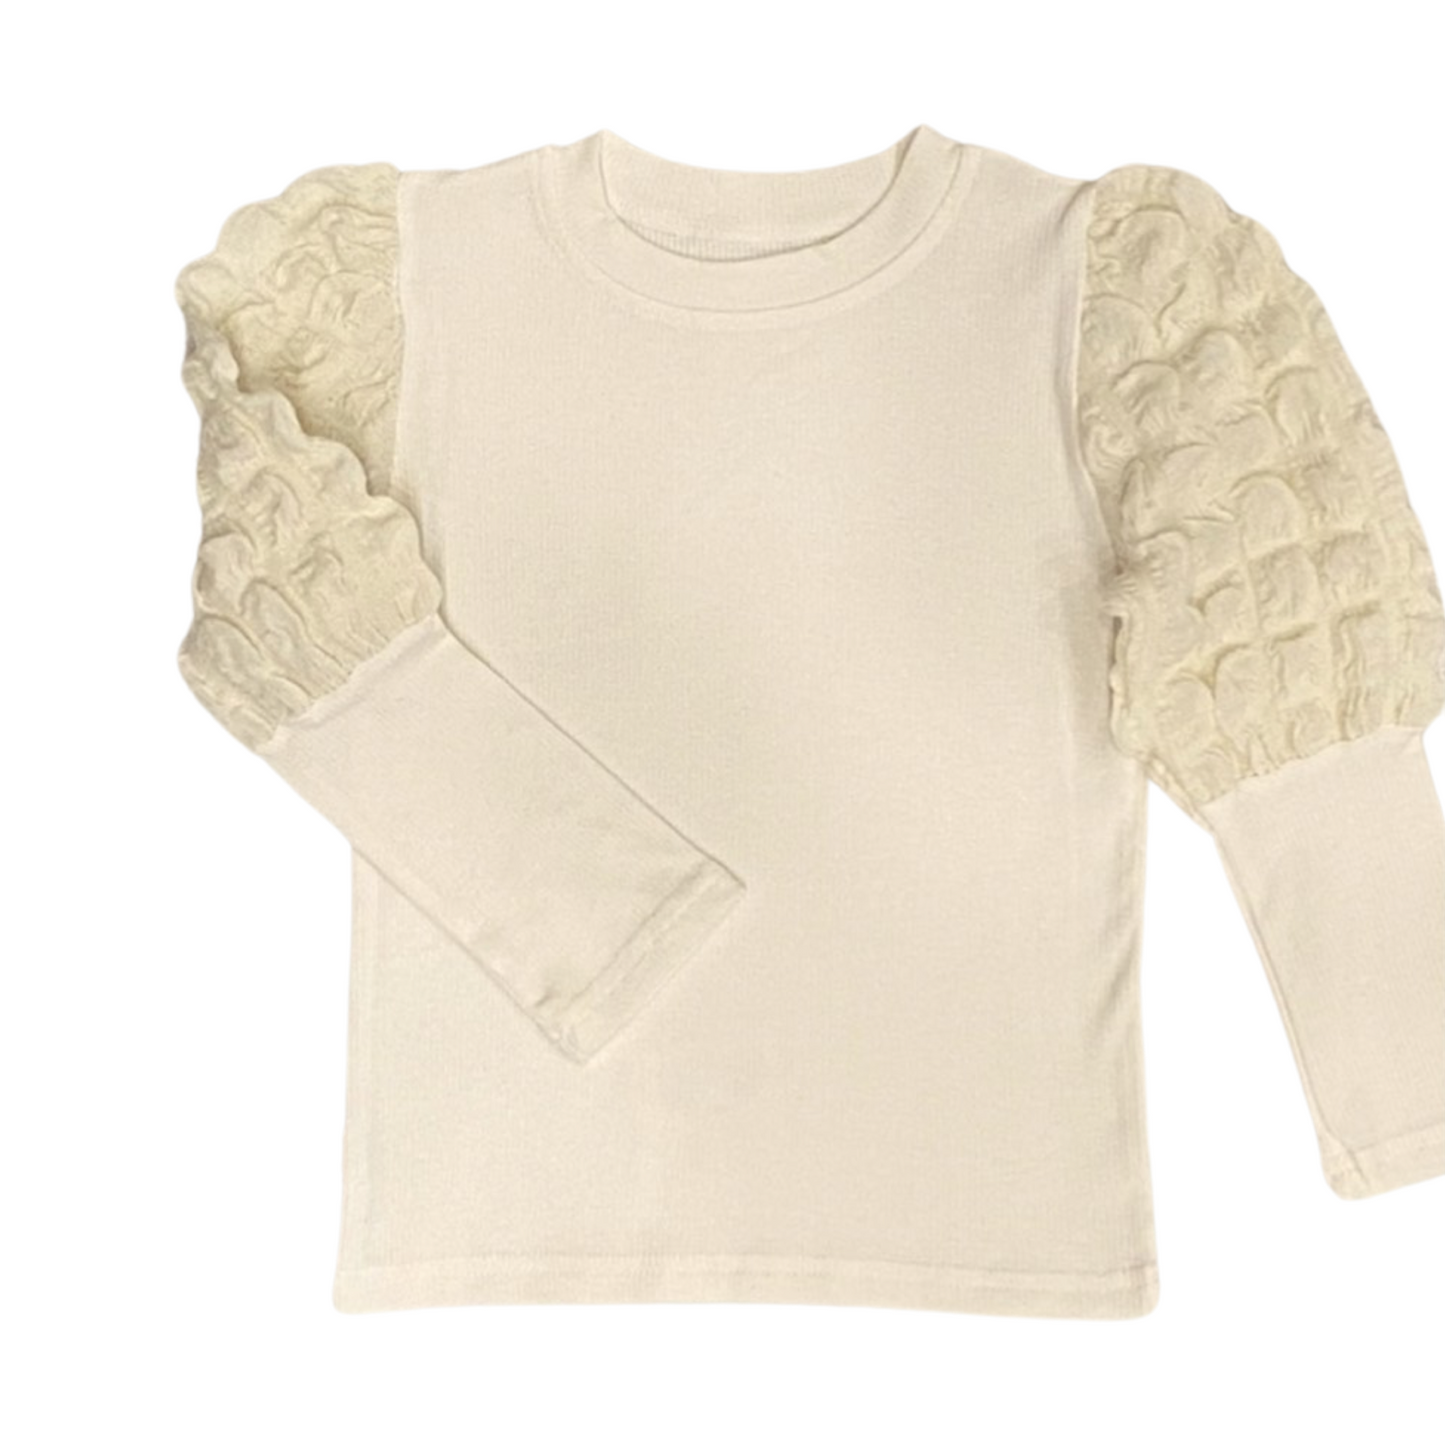 The Prissy Ribbed Puff Top